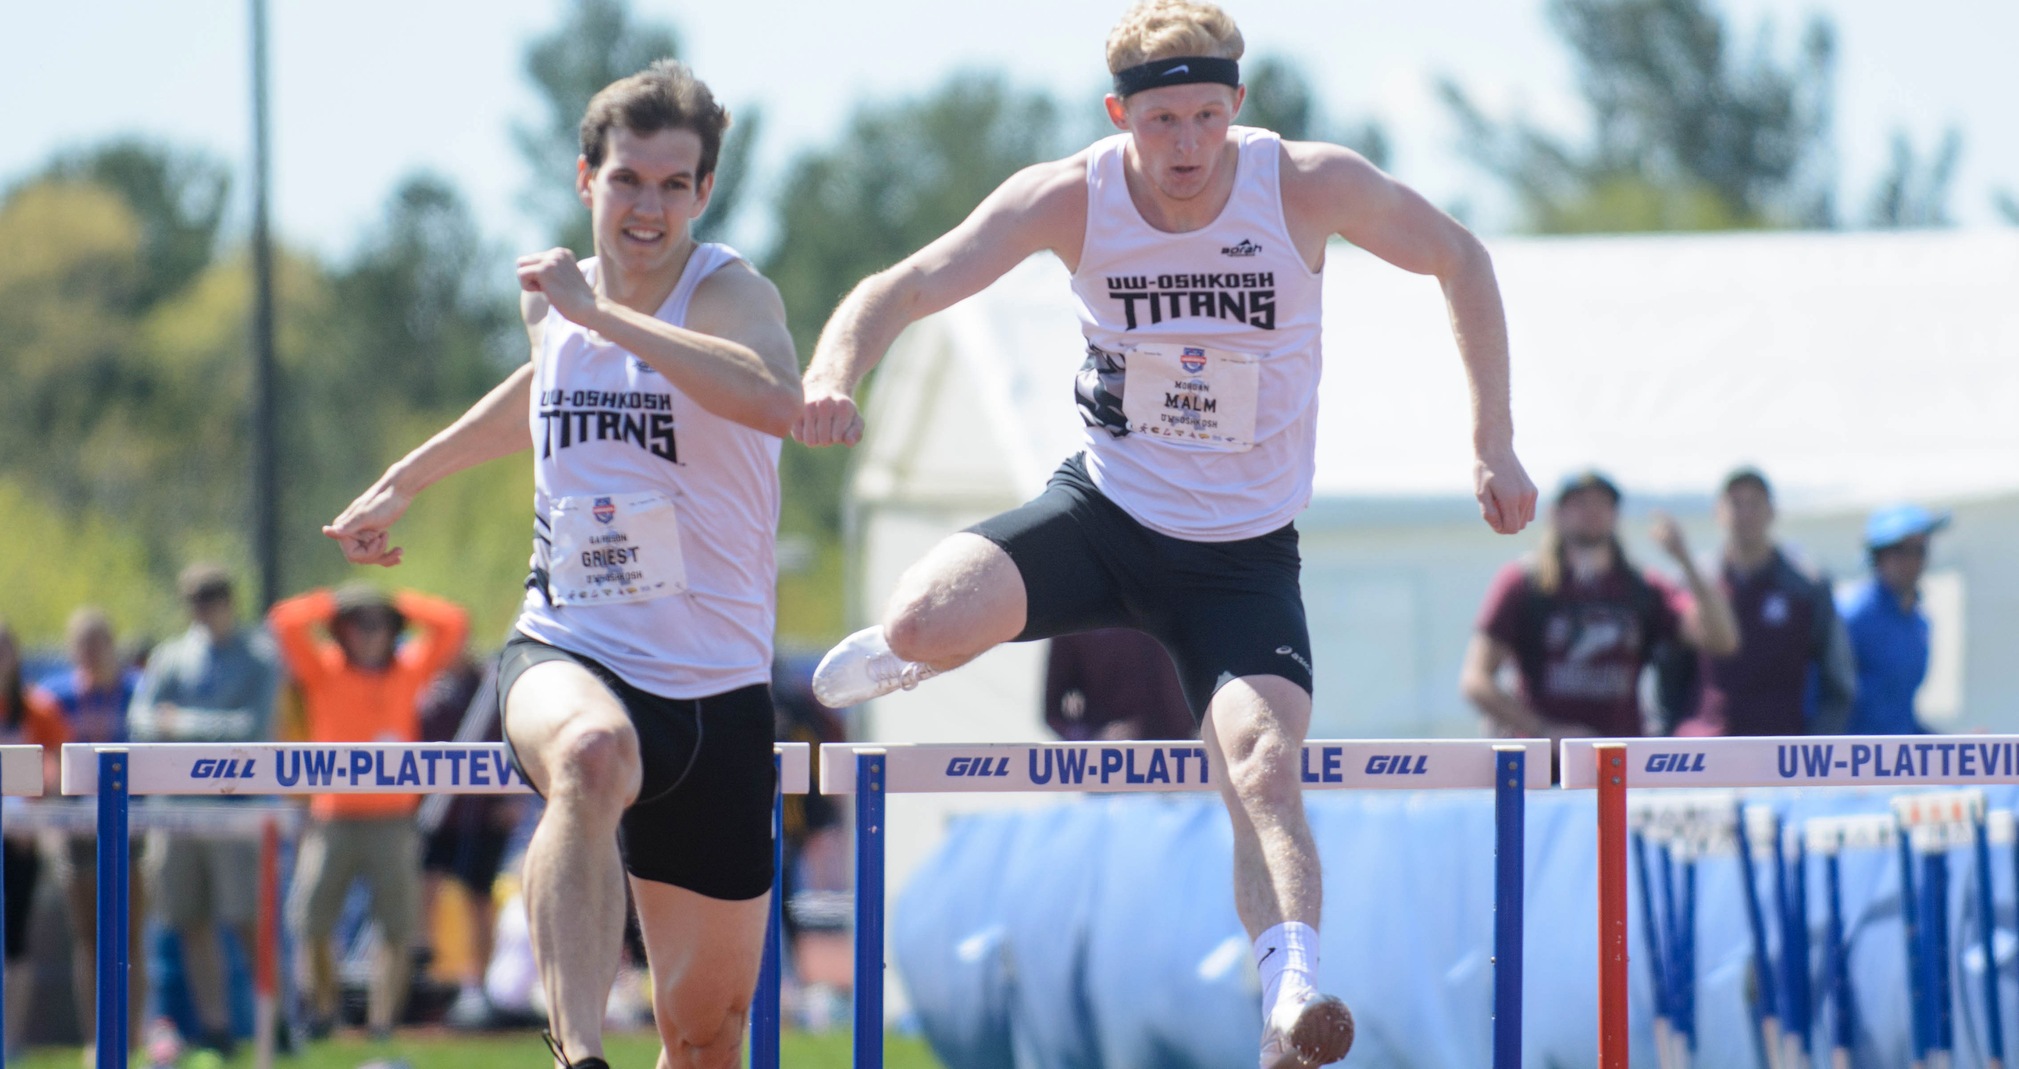 Garrison Griest (left) finished third and Morgan Malm fourth in the 400-meter hurdles at this year's championship.